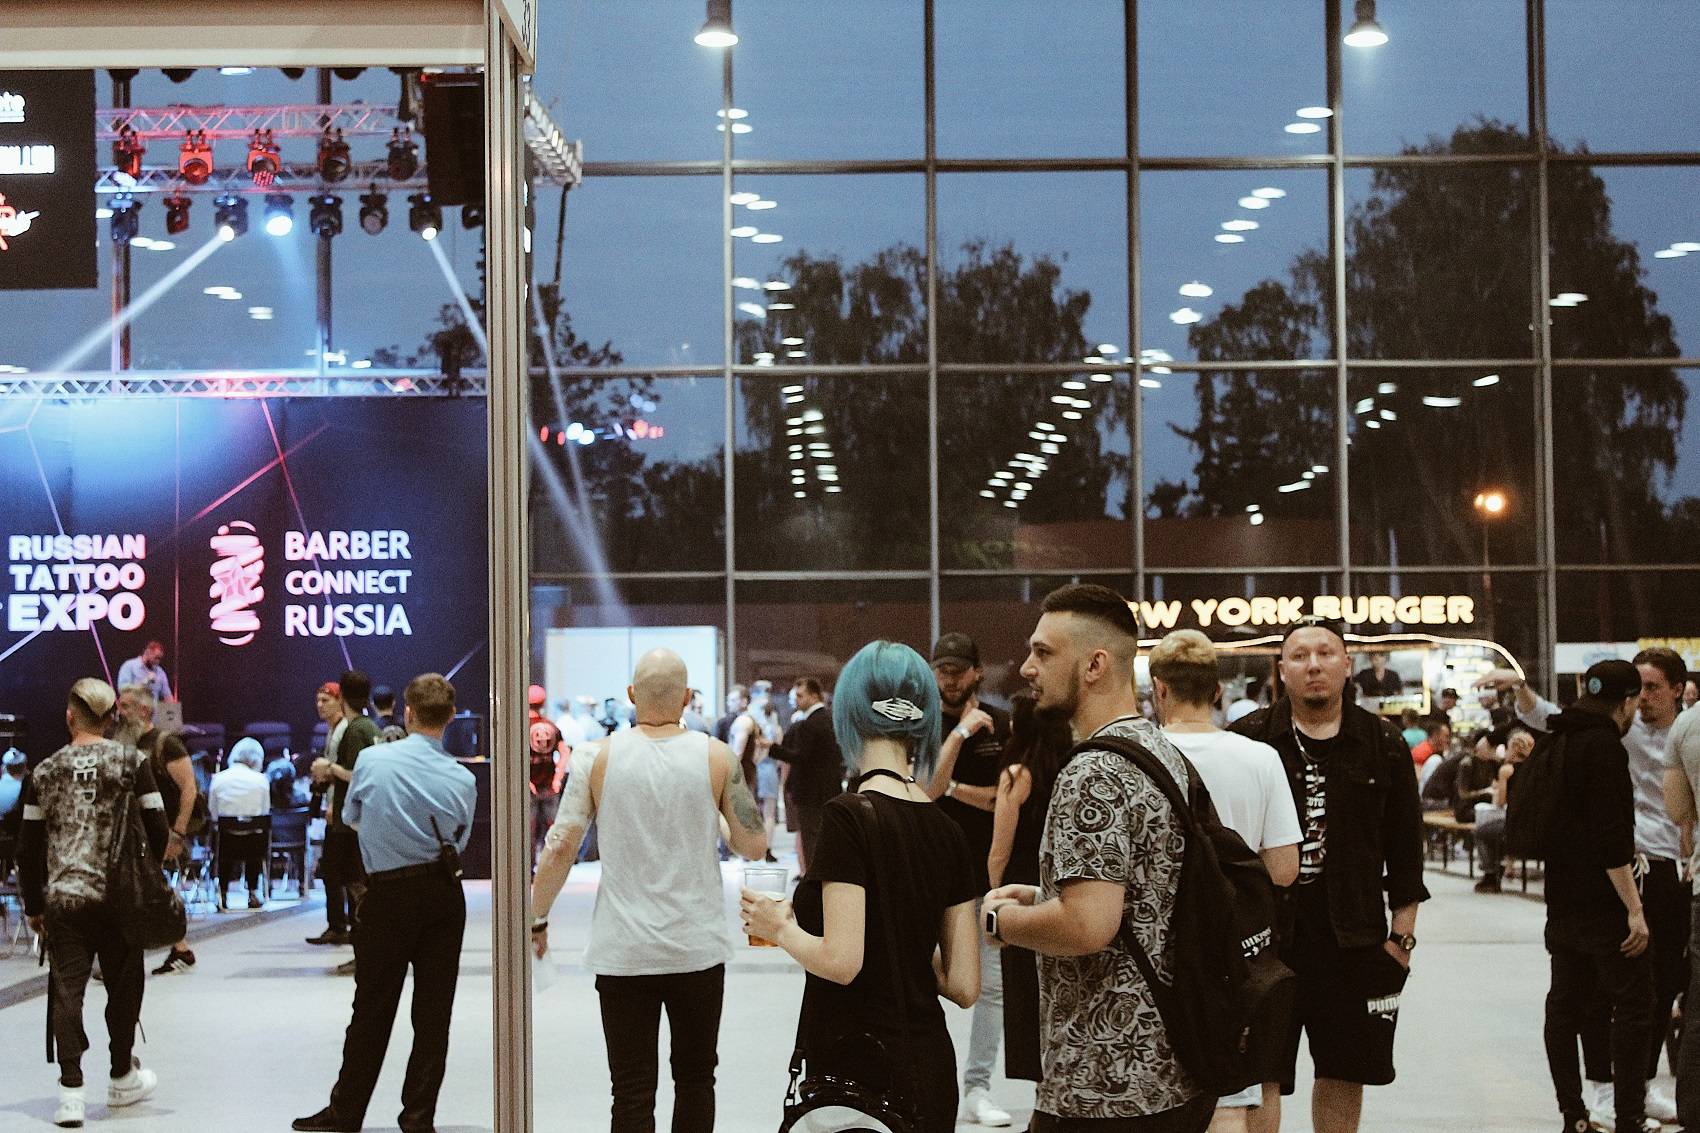 BARBER CONNECT RUSSIA 2018 Москва - Stone Forest